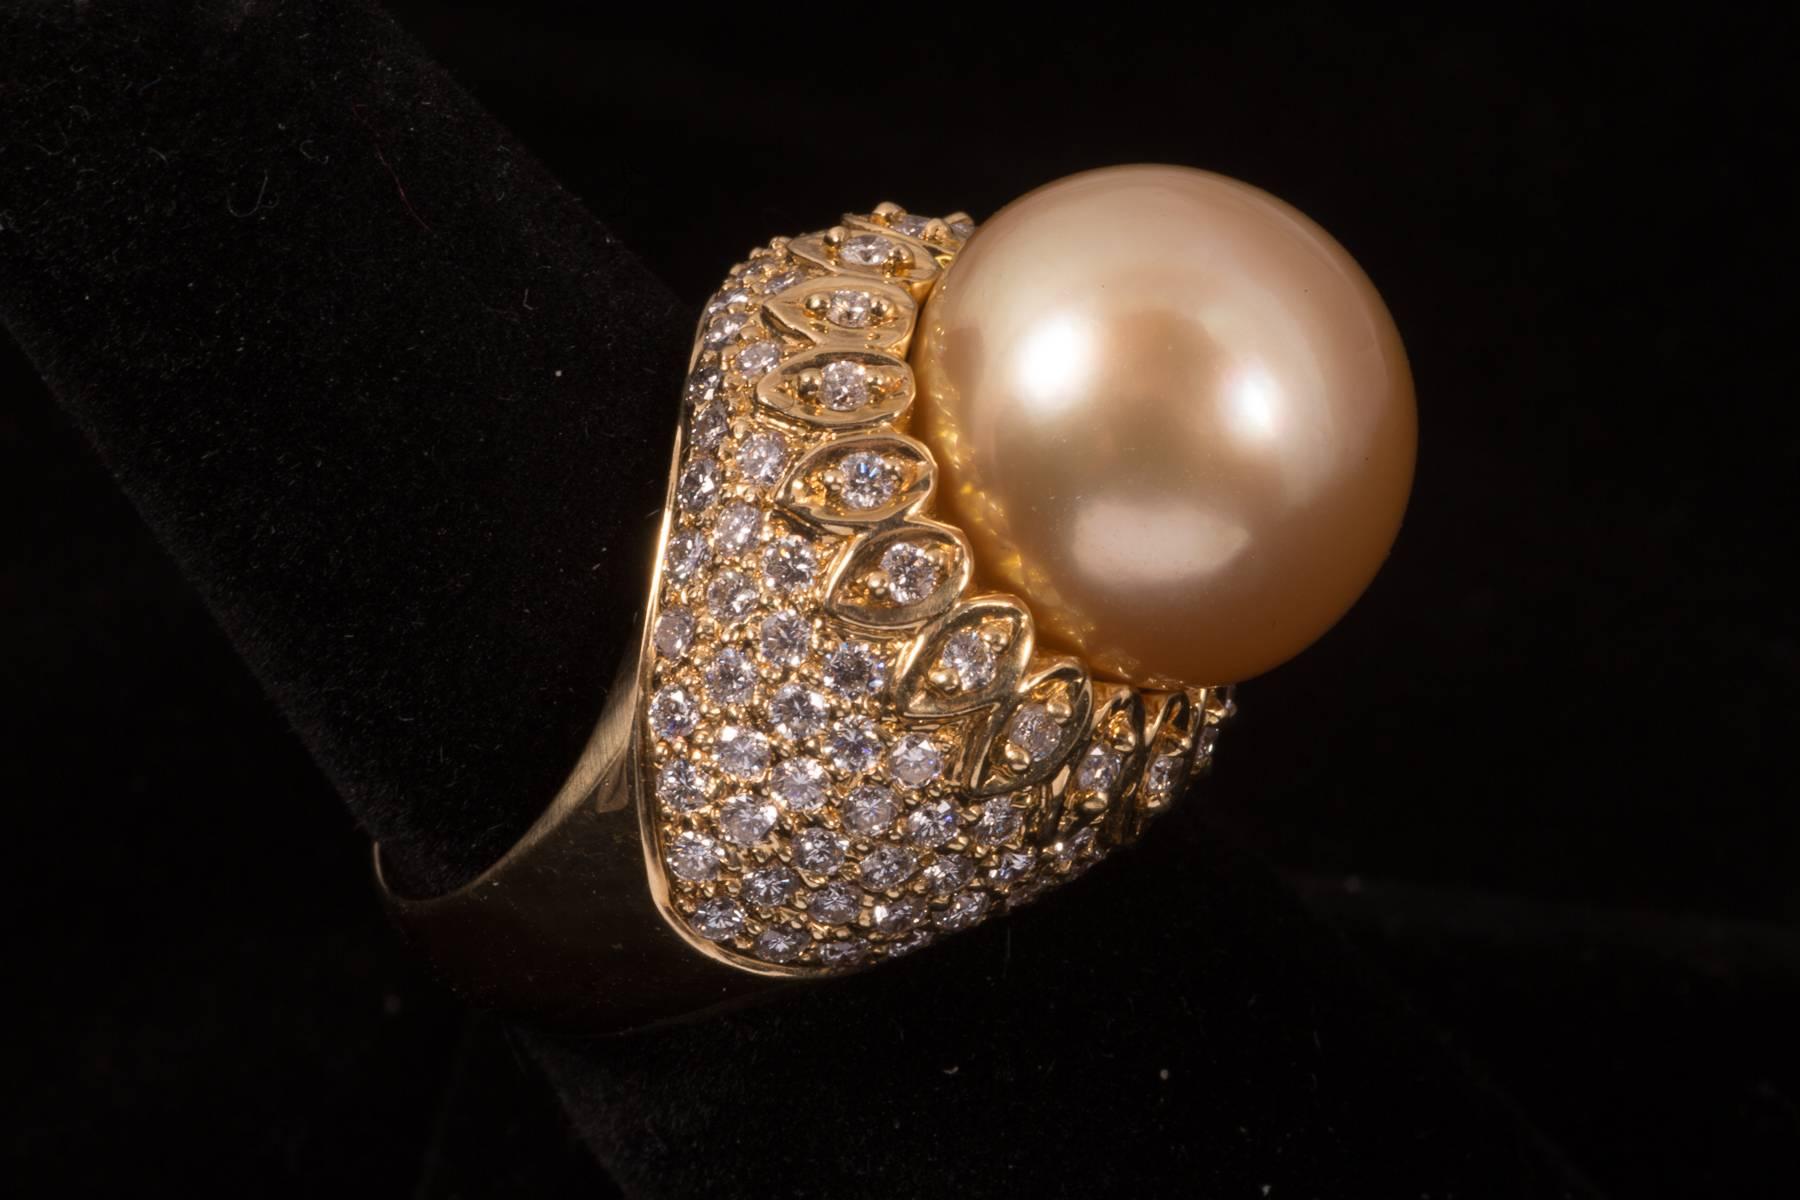 Fabulous Golden Pearl and Diamond Ring. The Pearl measures 14.28 mm with 1.85 carats of Round Brilliant Diamonds
Size 6